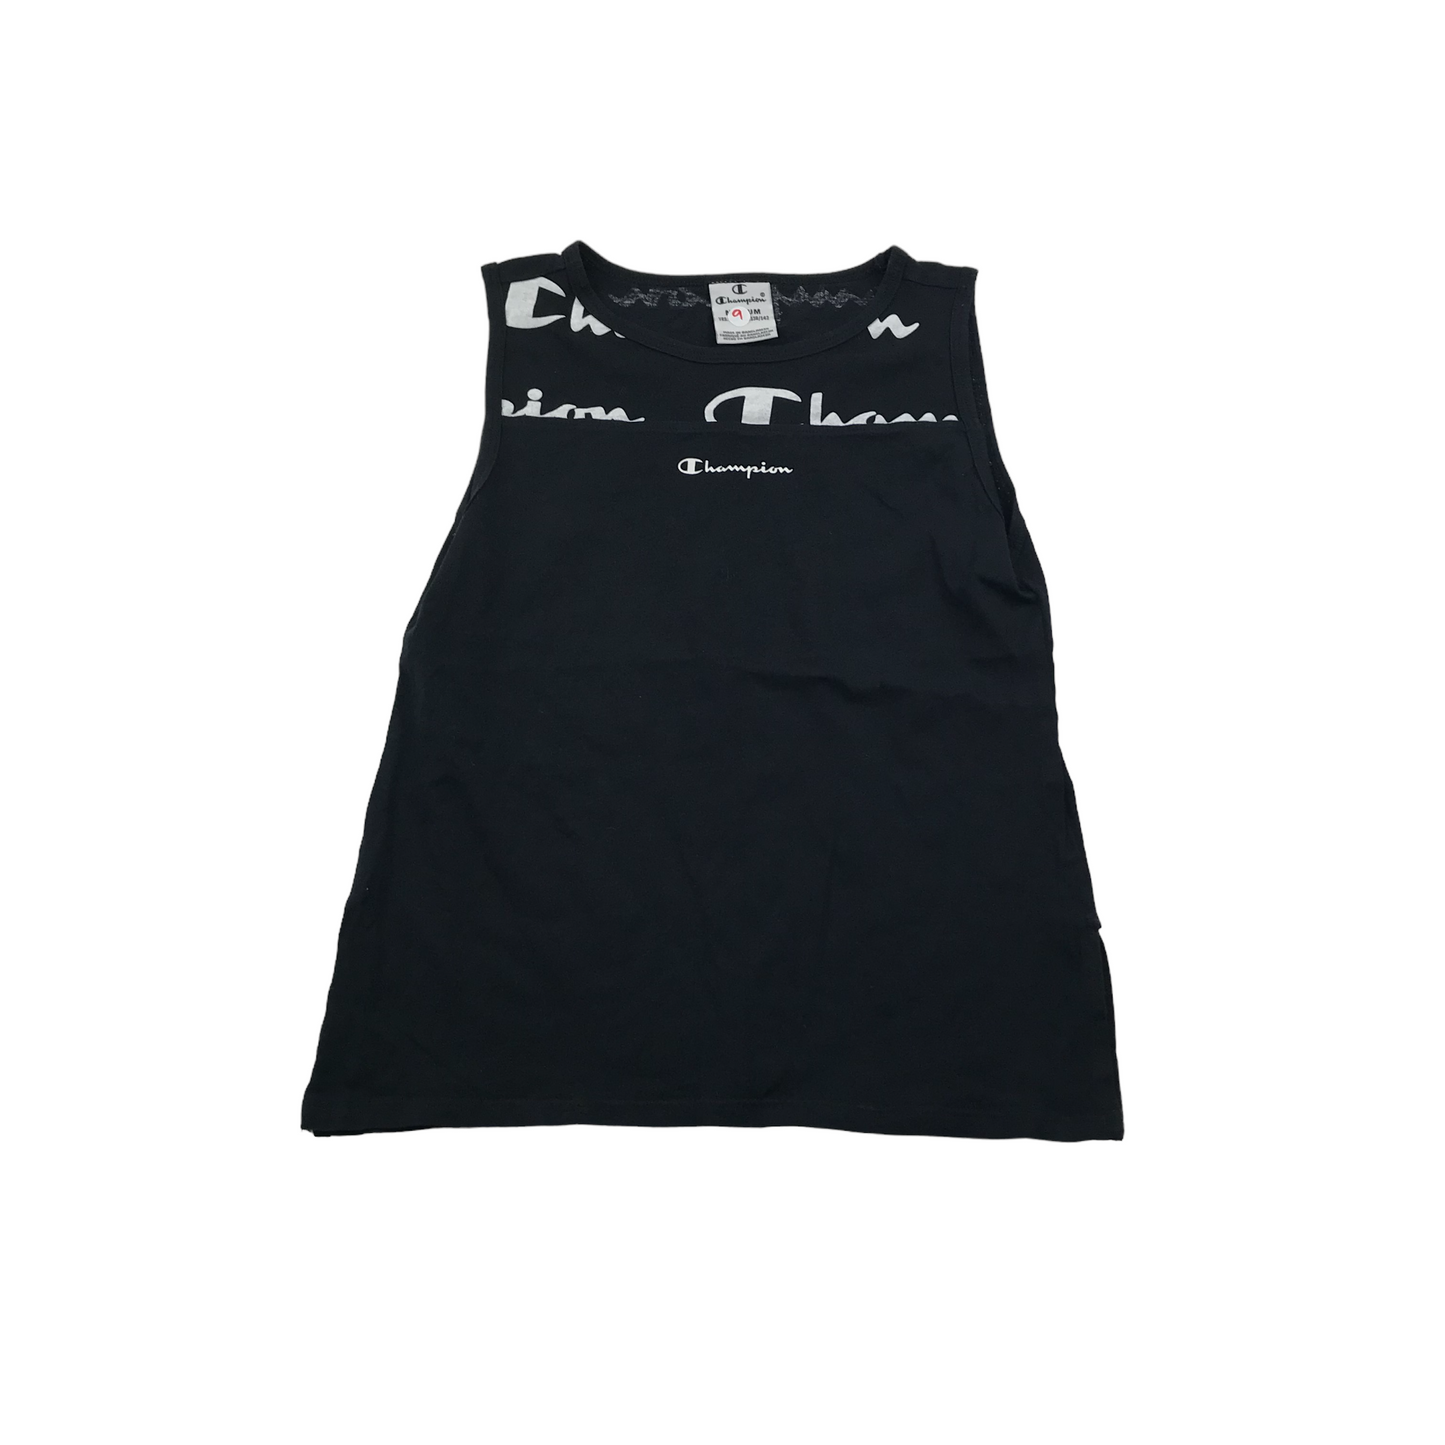 Champion Black and White Cotton Tank Top and Shorts Set Age 9